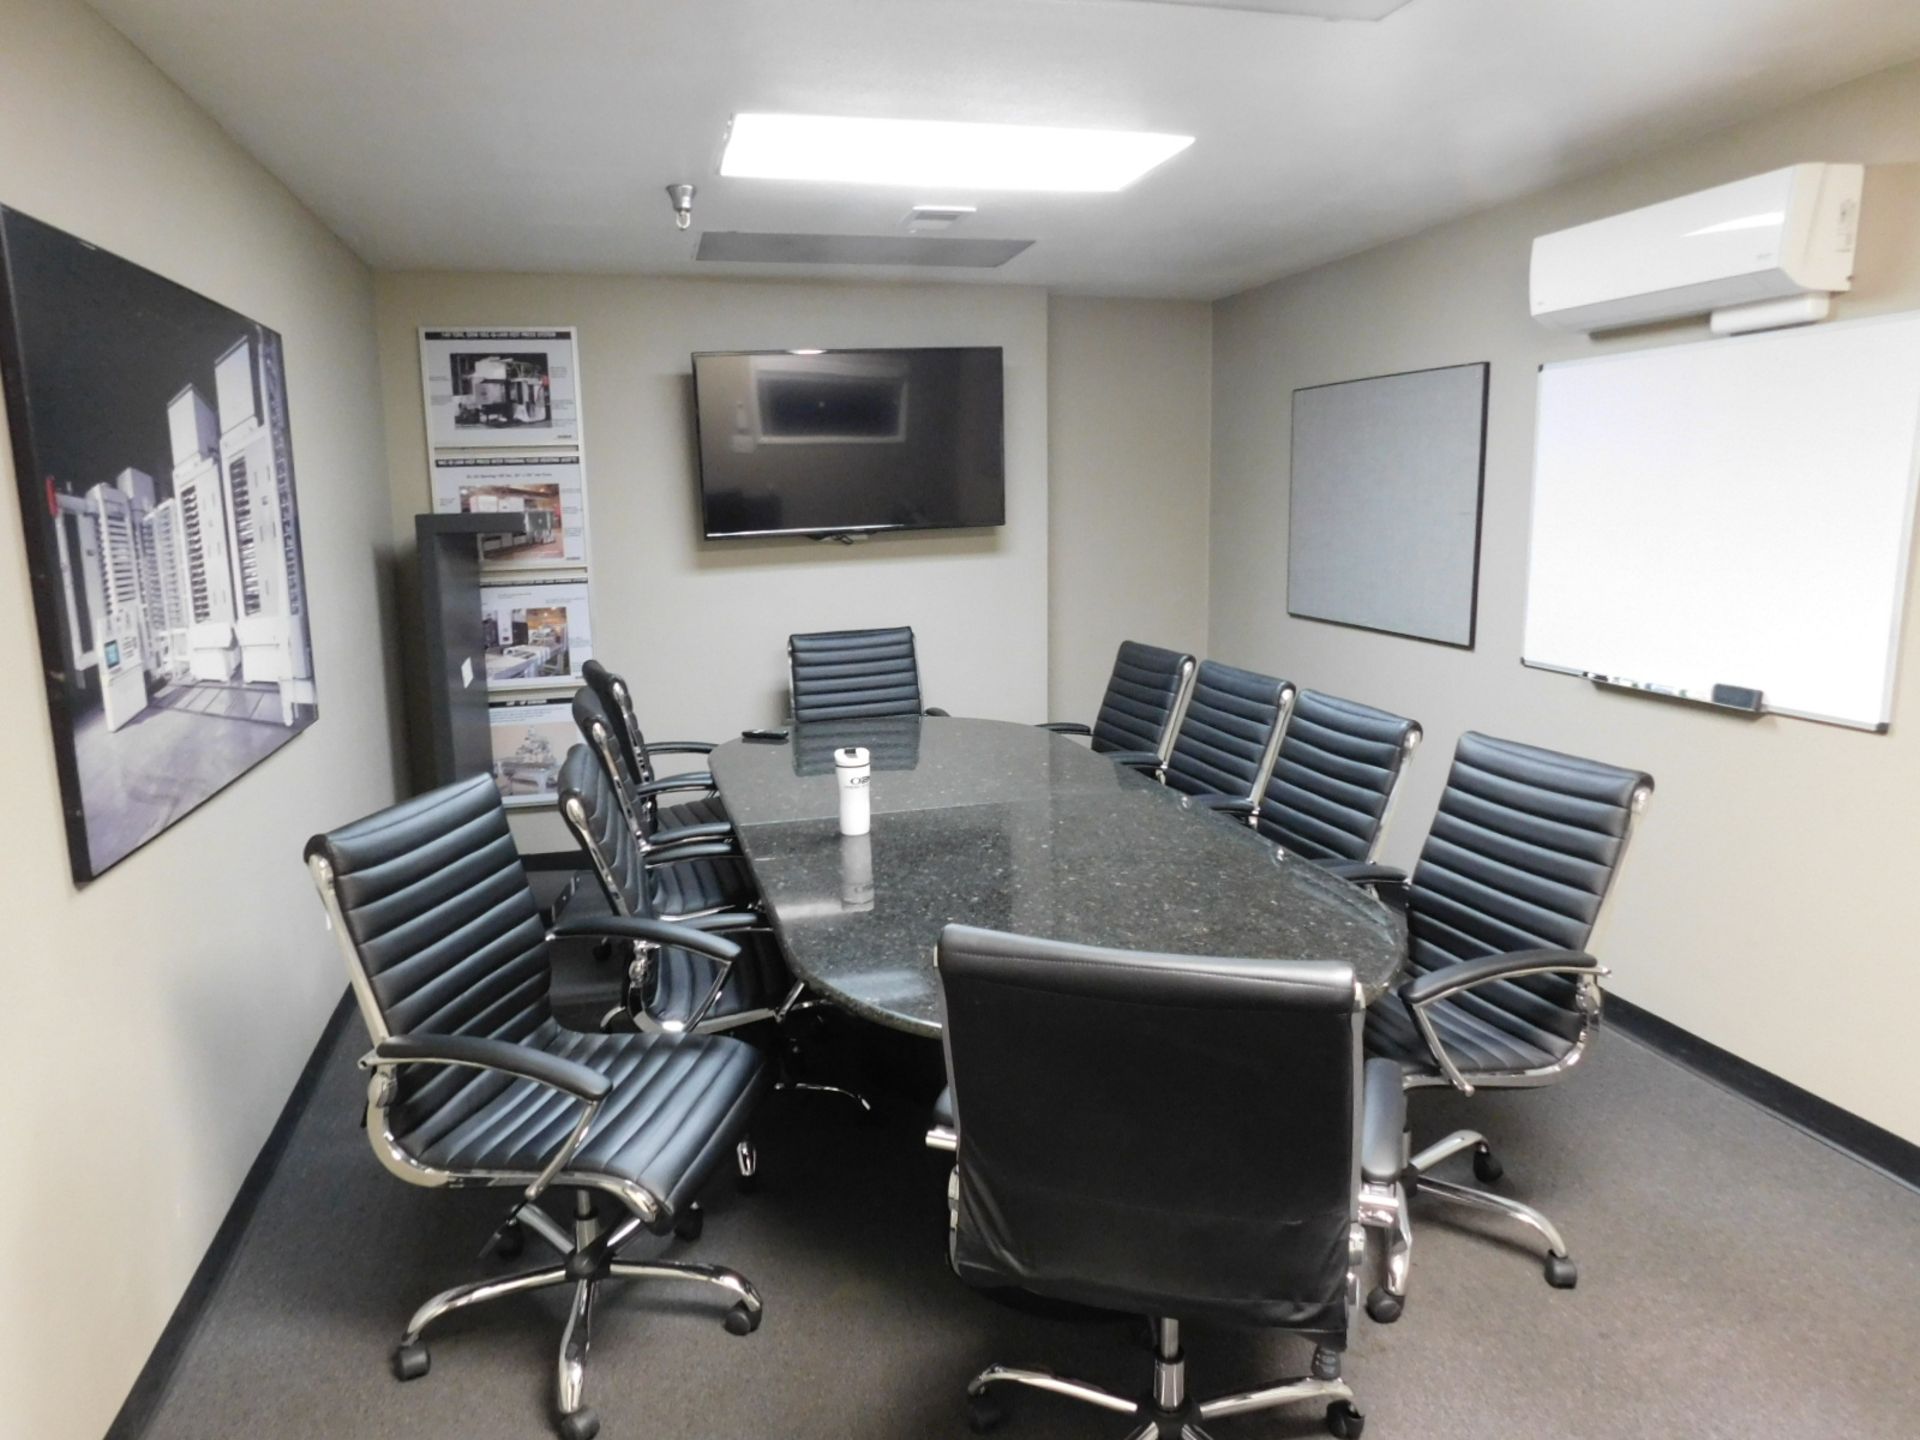 LOT - CONTENTS OF CONFERENCE ROOM: 10' X 4' GRANITE CONFERENCE TABLE, (10) CHAIRS, INSIGNIA 55"